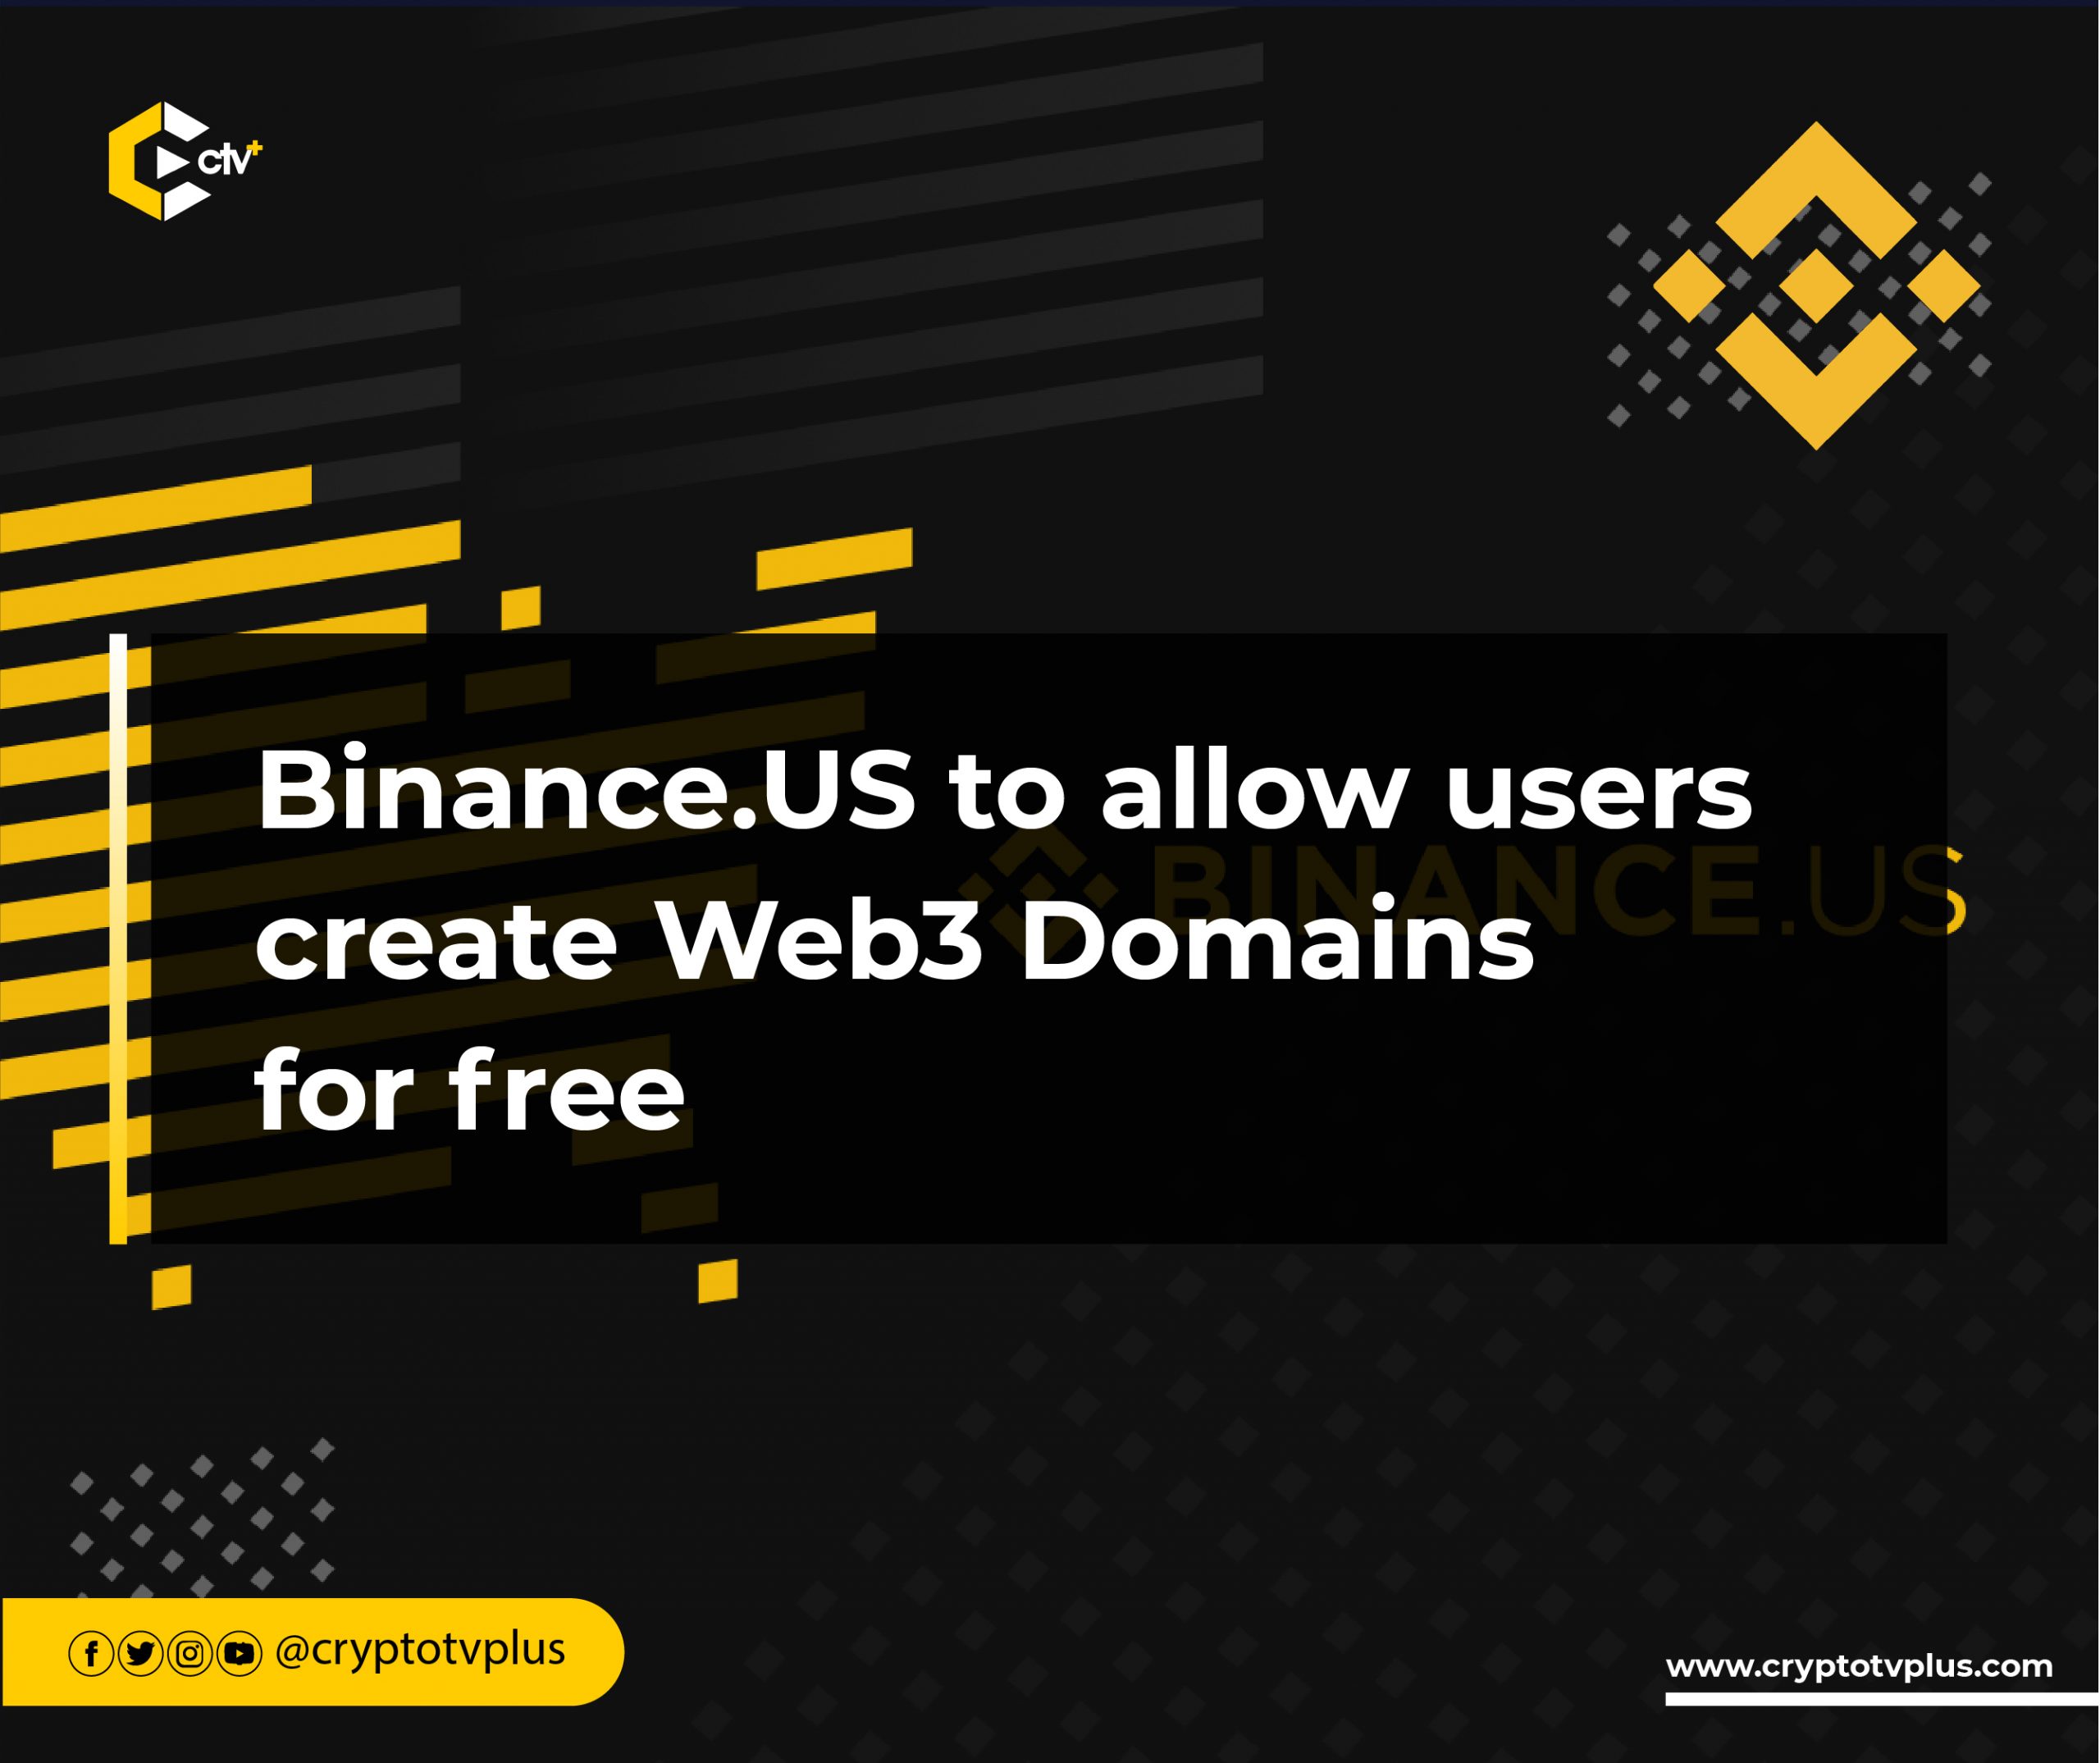 binance-us-to-allow-users-create-web3-domains-for-free-or-cryptotvplus-defi-nft-bitcoin-ethereum-altcoin-cryptocurrency-and-amp-blockchain-news-interviews-research-shows